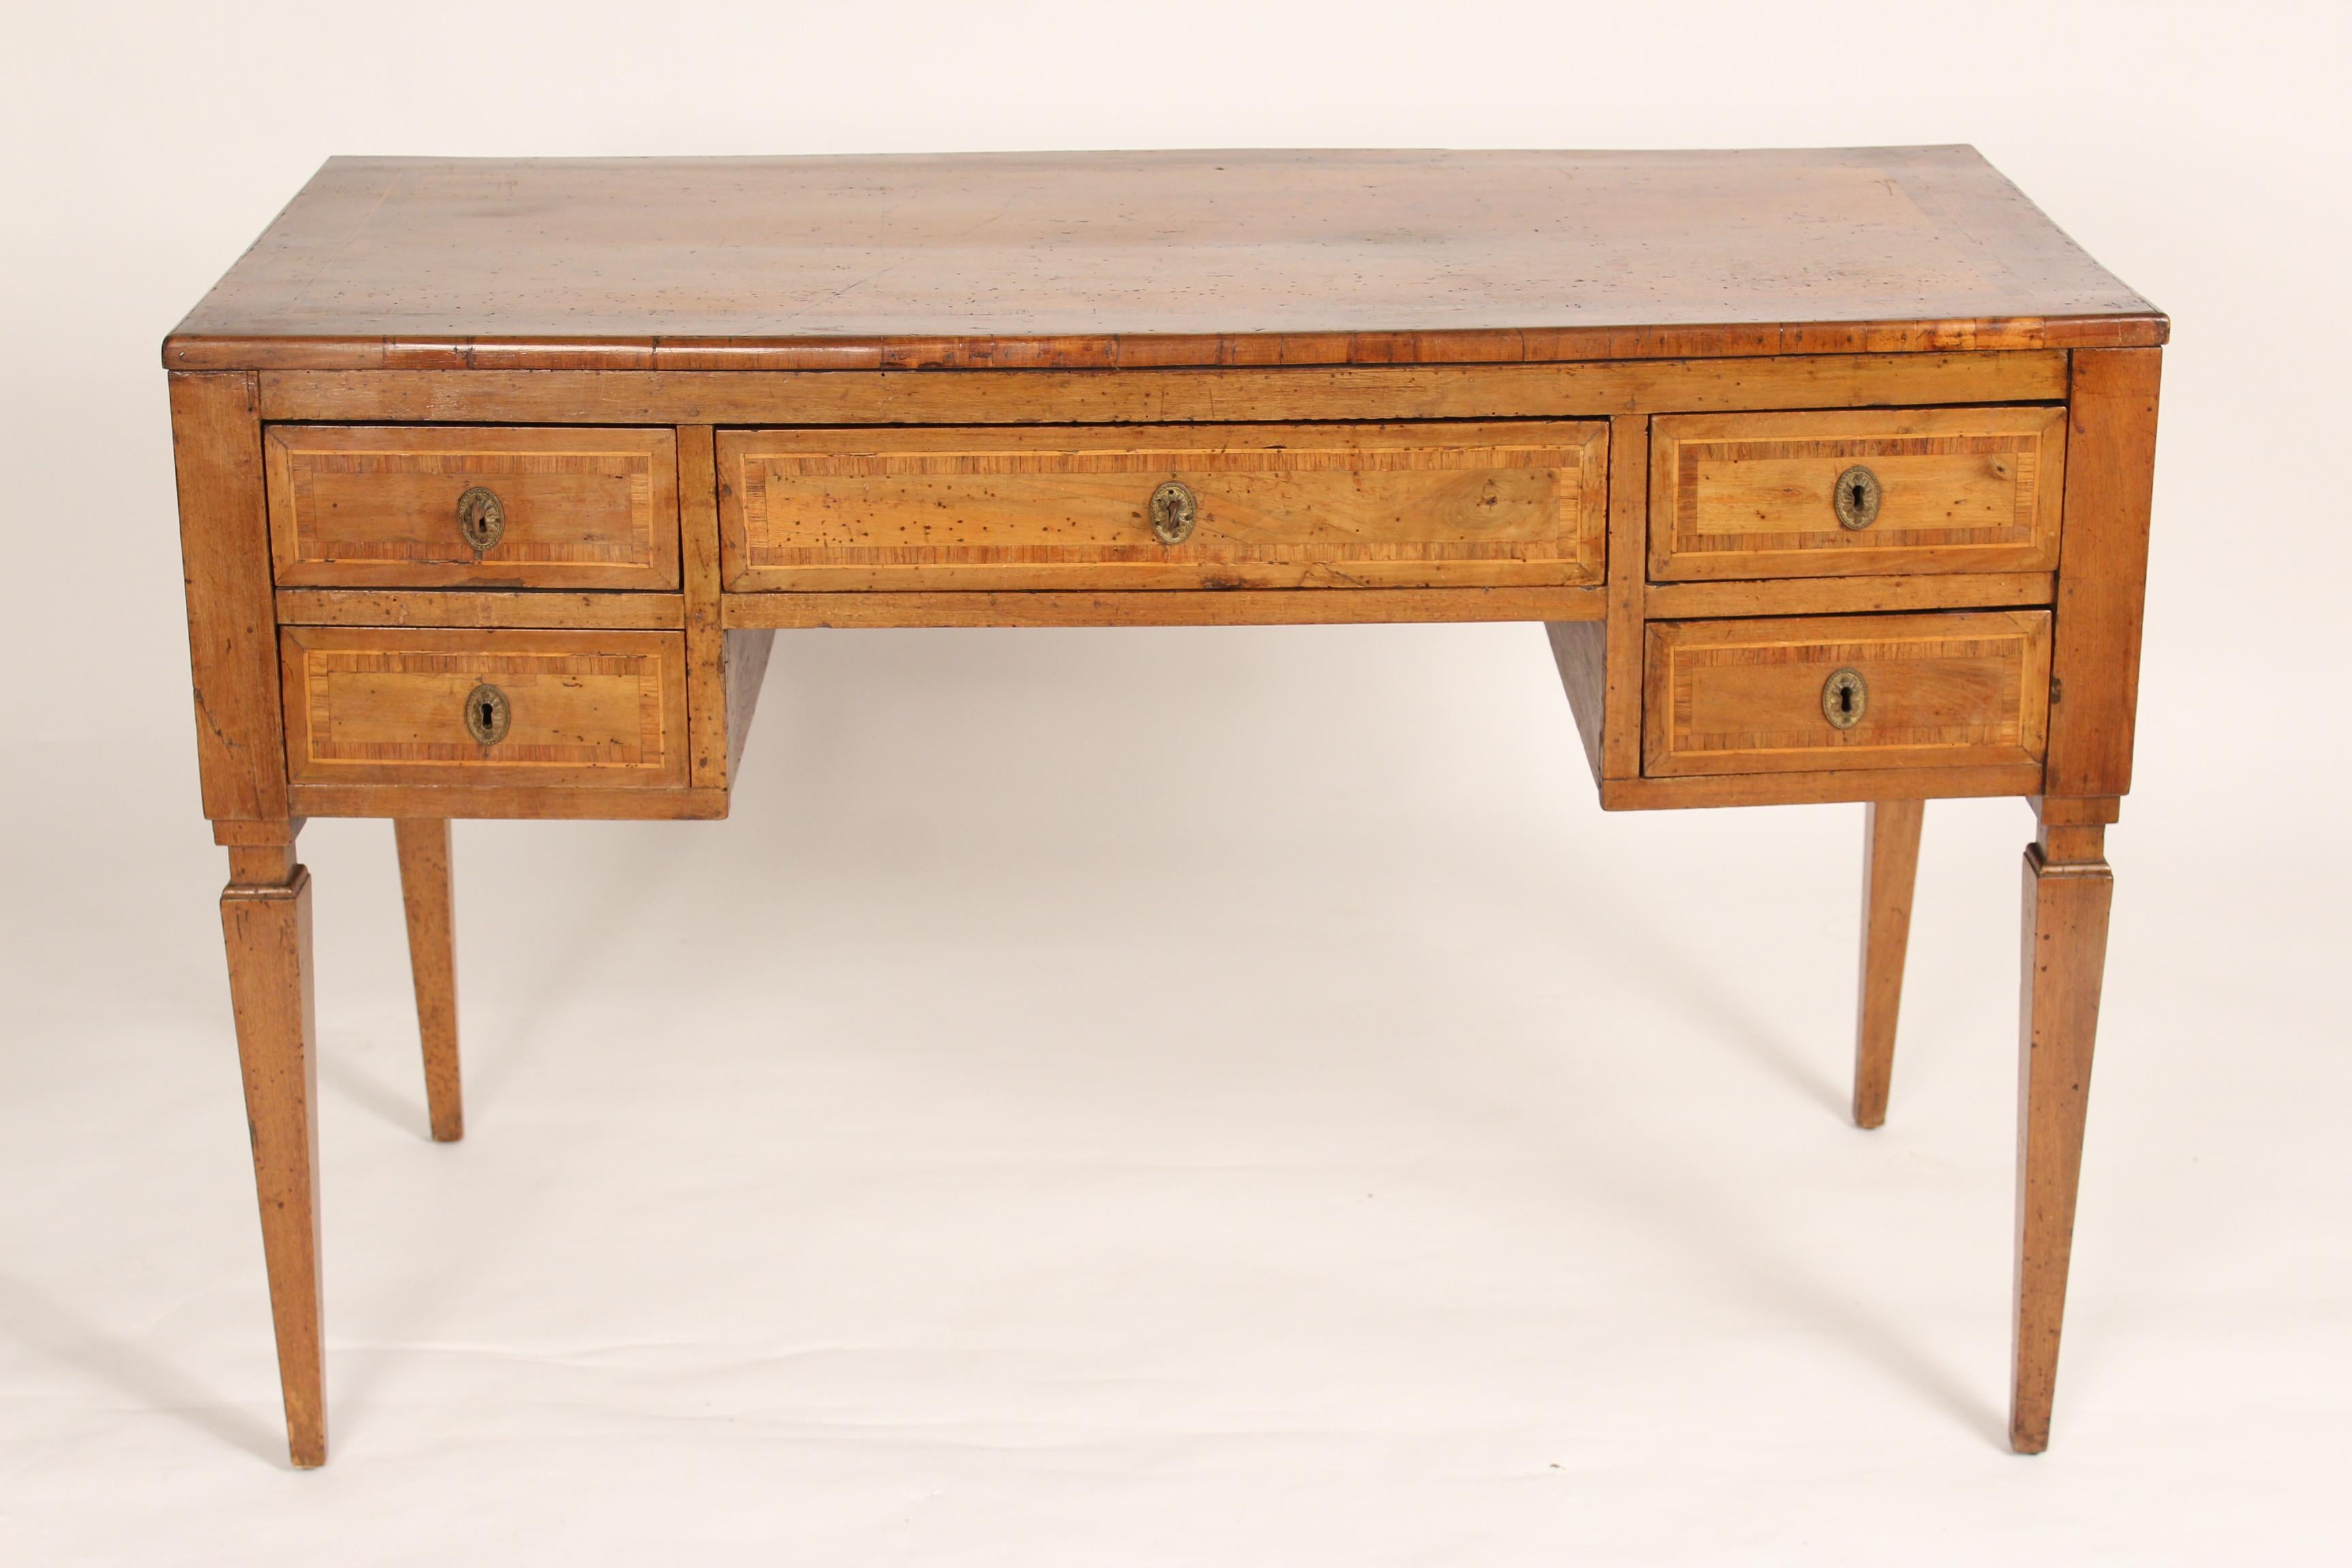 Antique Louis XVI style walnut desk, 19th century. With hand dove tailed drawer construction and excellent old walnut color. Stamped on bottom 